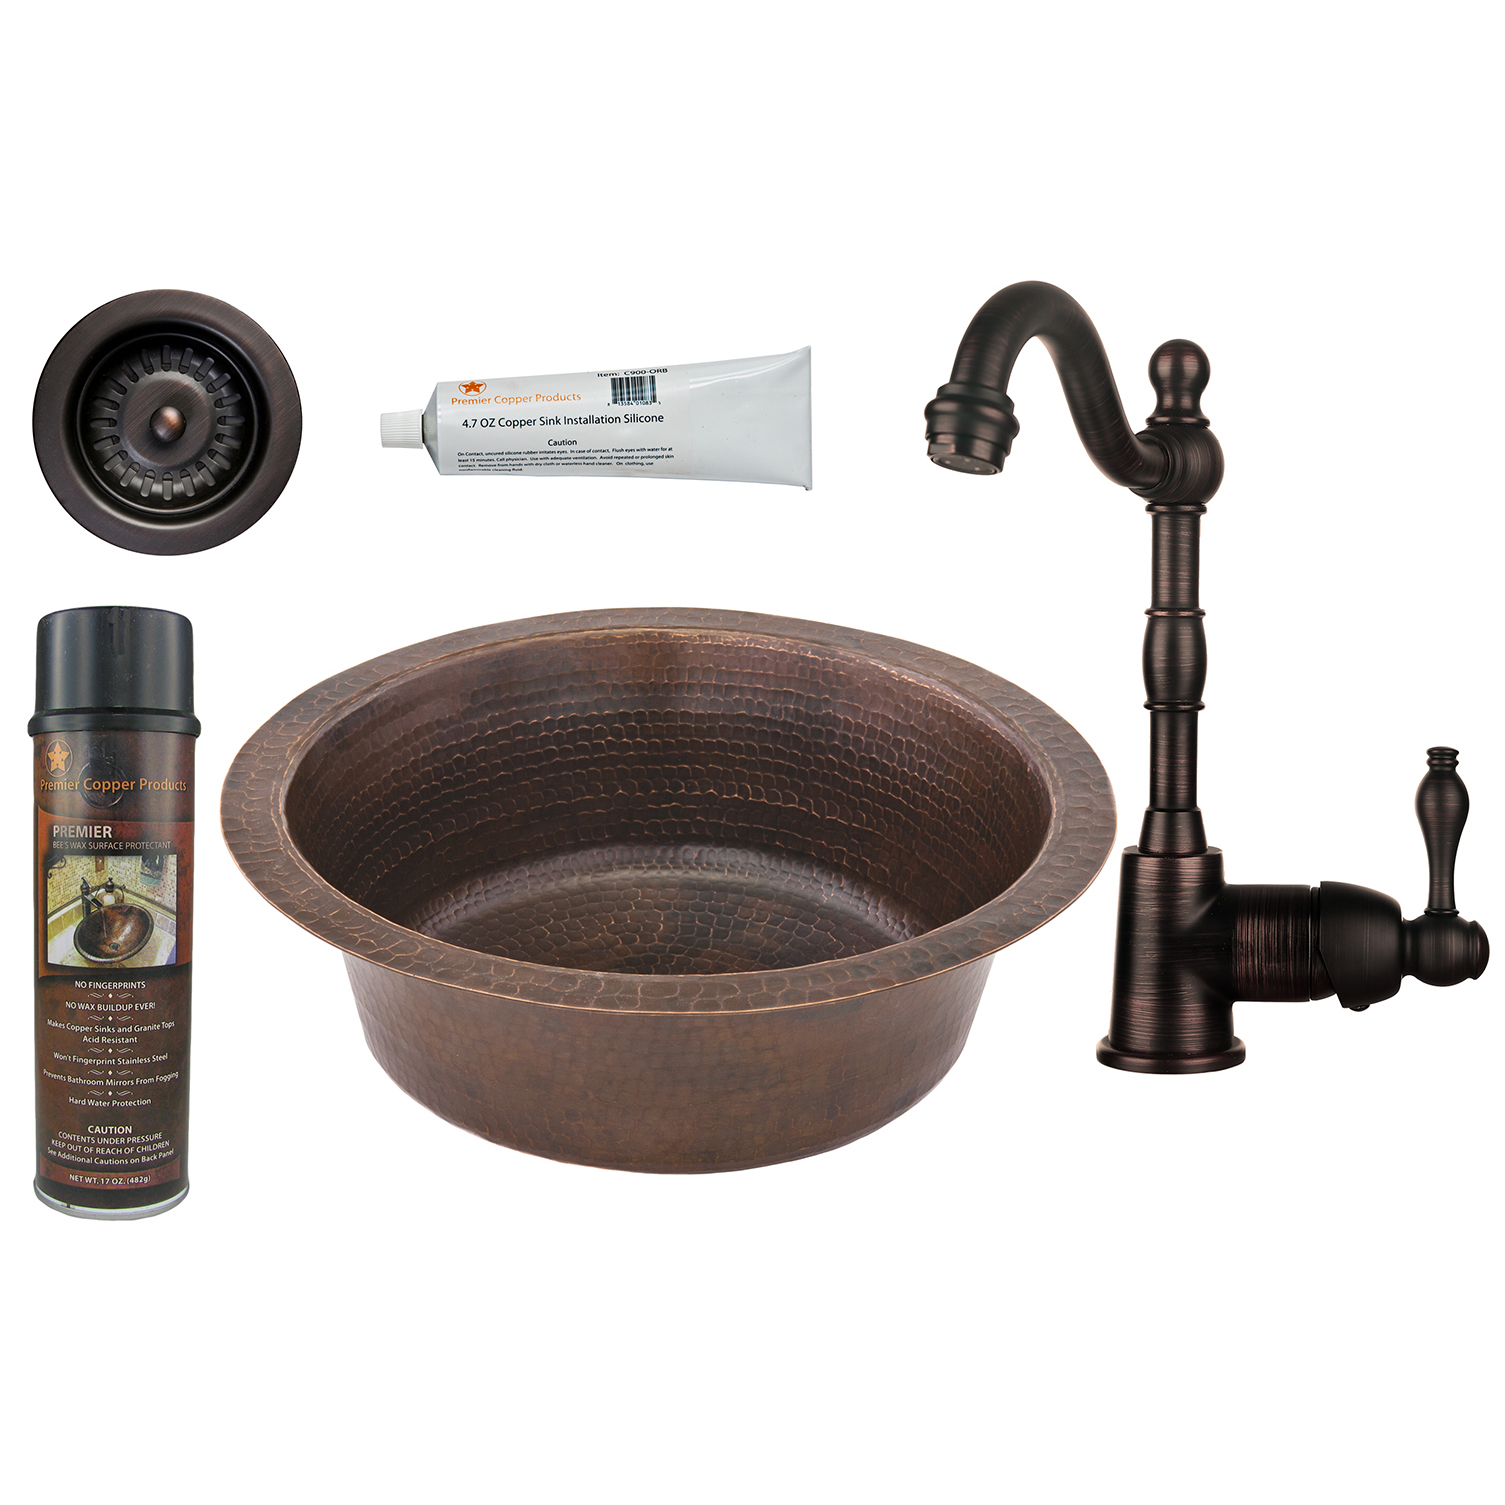 14 Inch Round Hammered Copper Prep Sink With 3.5 Inch Drain Size, Faucet And Accessories Package, Oil Rubbed Bronze